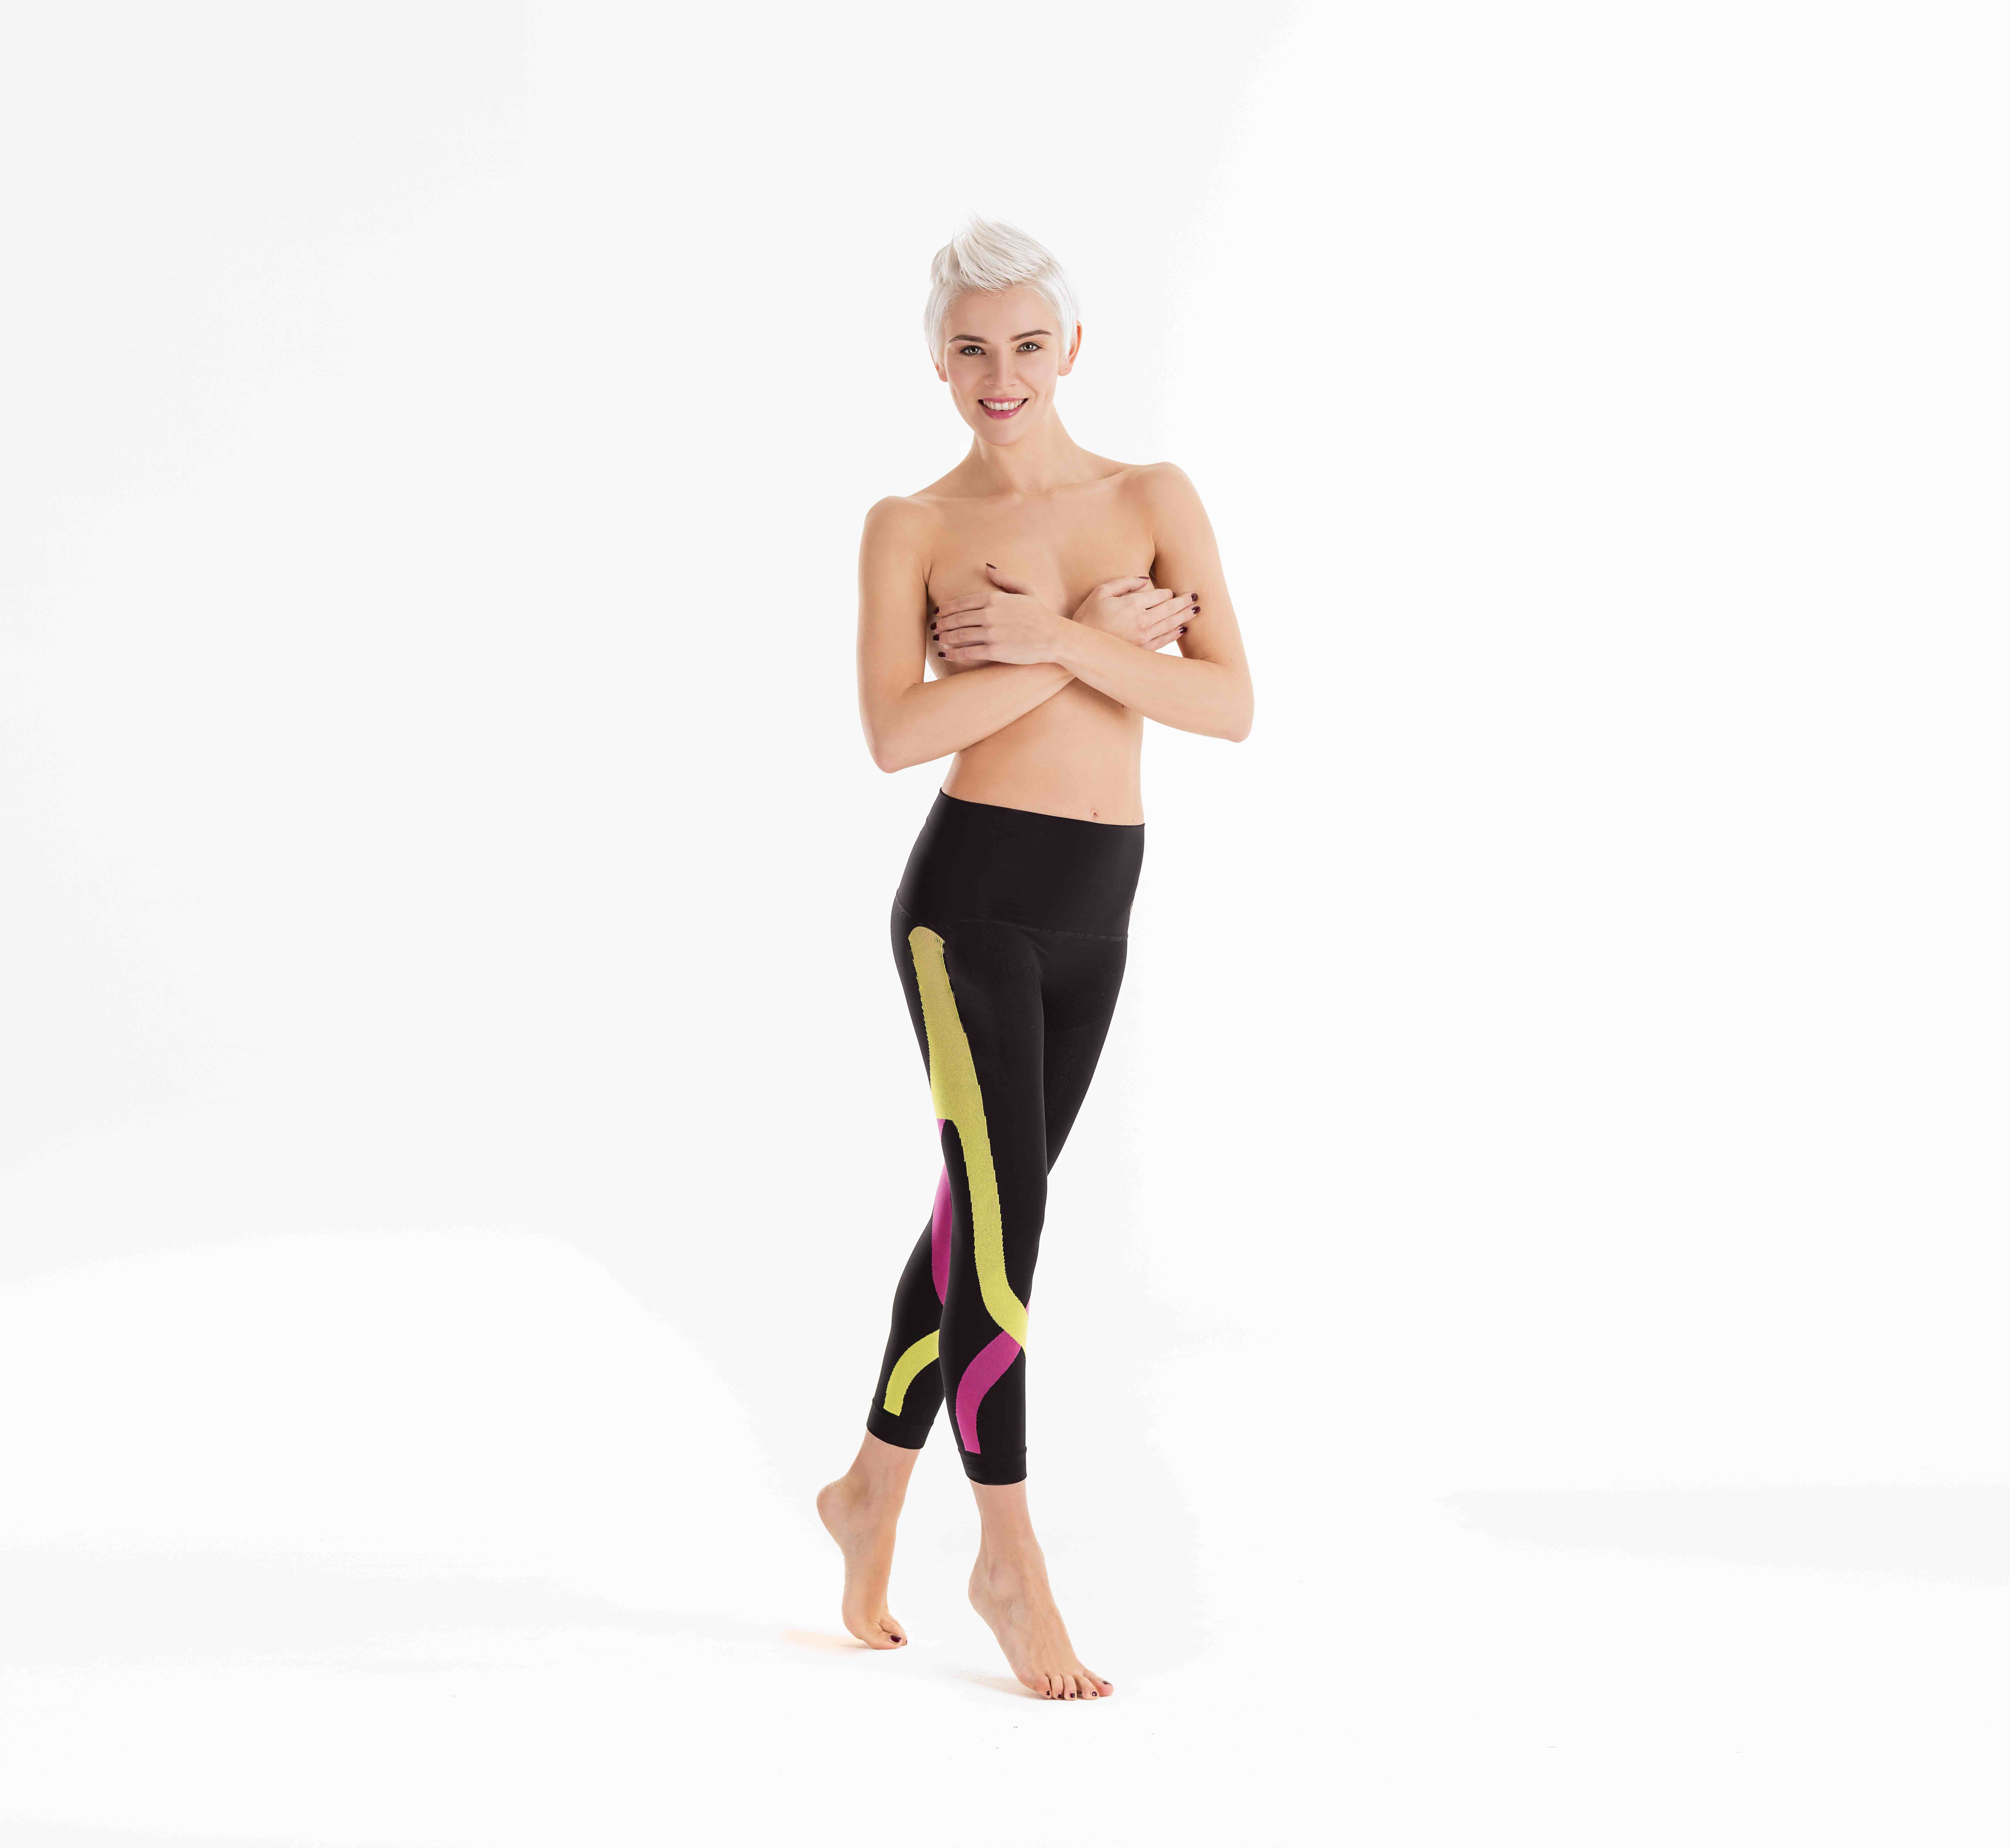 For the launch, Duelegs has created a collection made exclusively with Fulgar yarn and Lycra elastane fibre to provide maximum comfort and fit. 